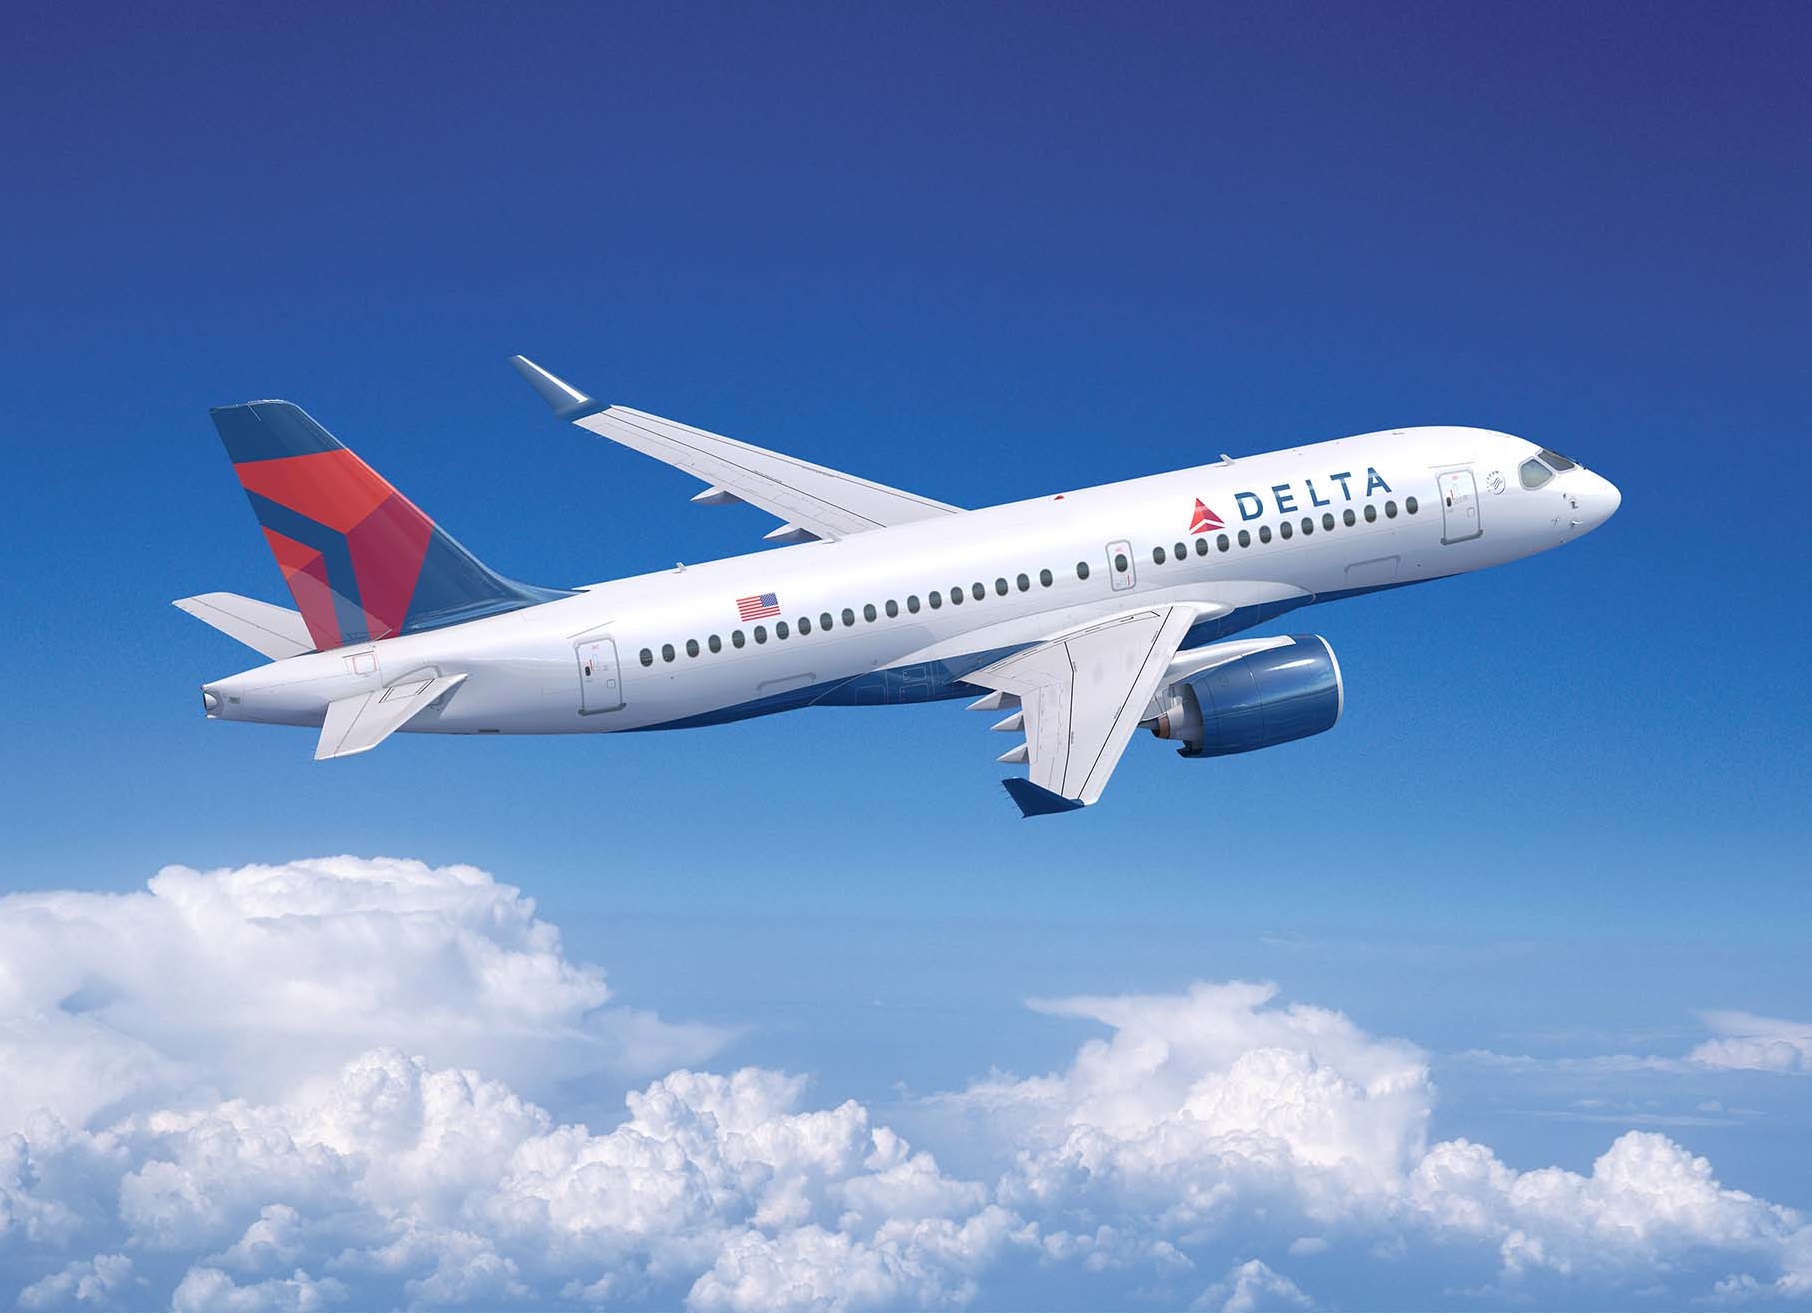 Delta Air Lines orders 5 additional Airbus A220 aircraft Skies Mag